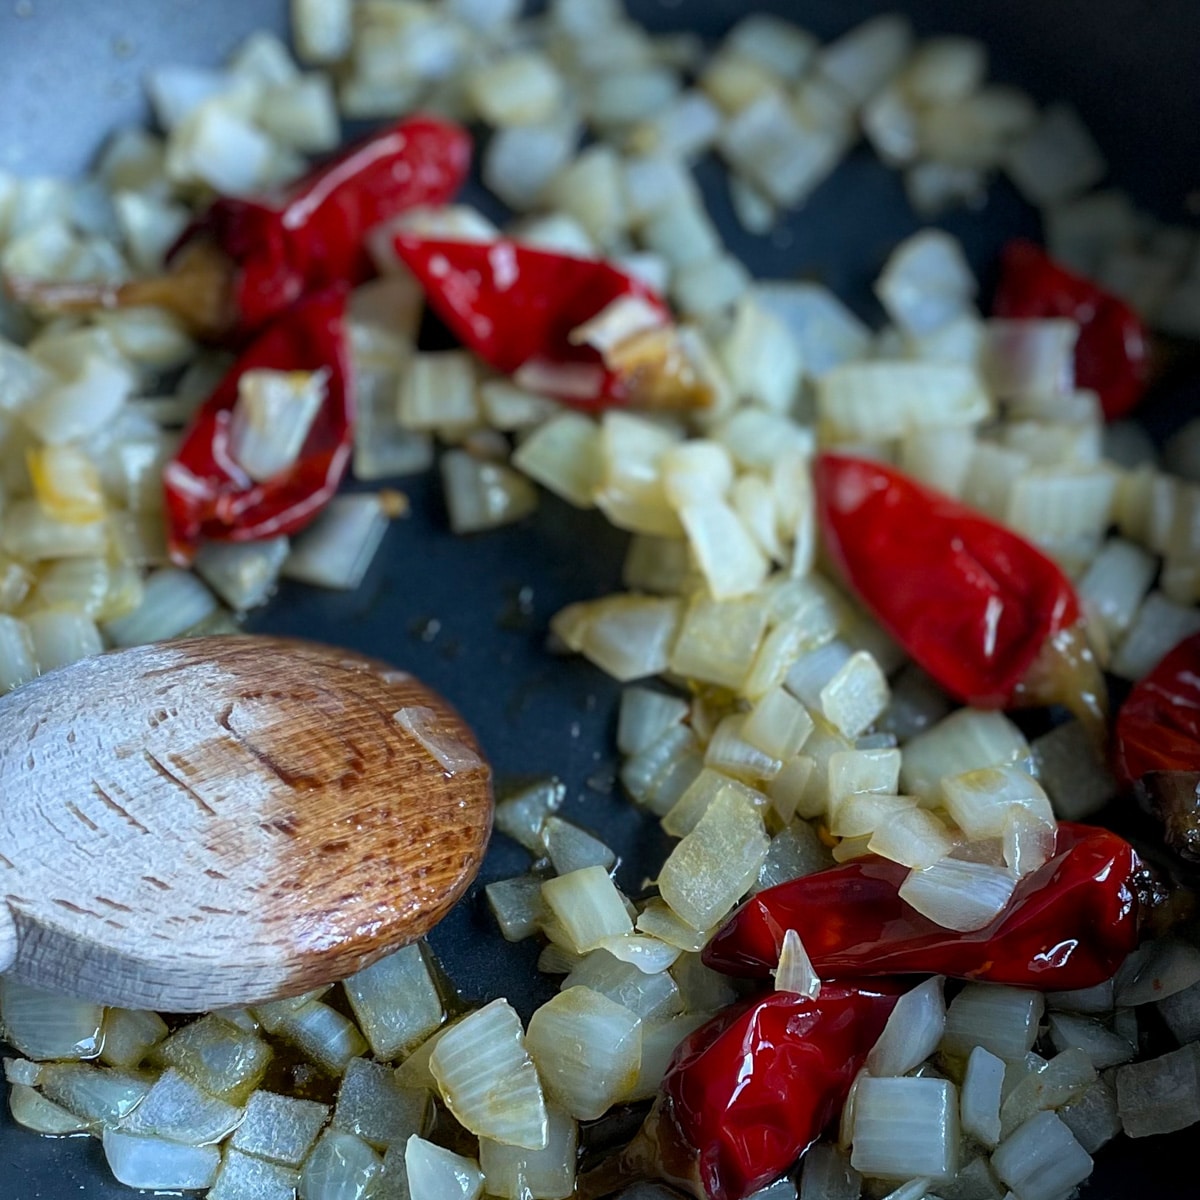 Sweating onions and Calabrian chilis are mixed with a wooden spoon in a black pan.